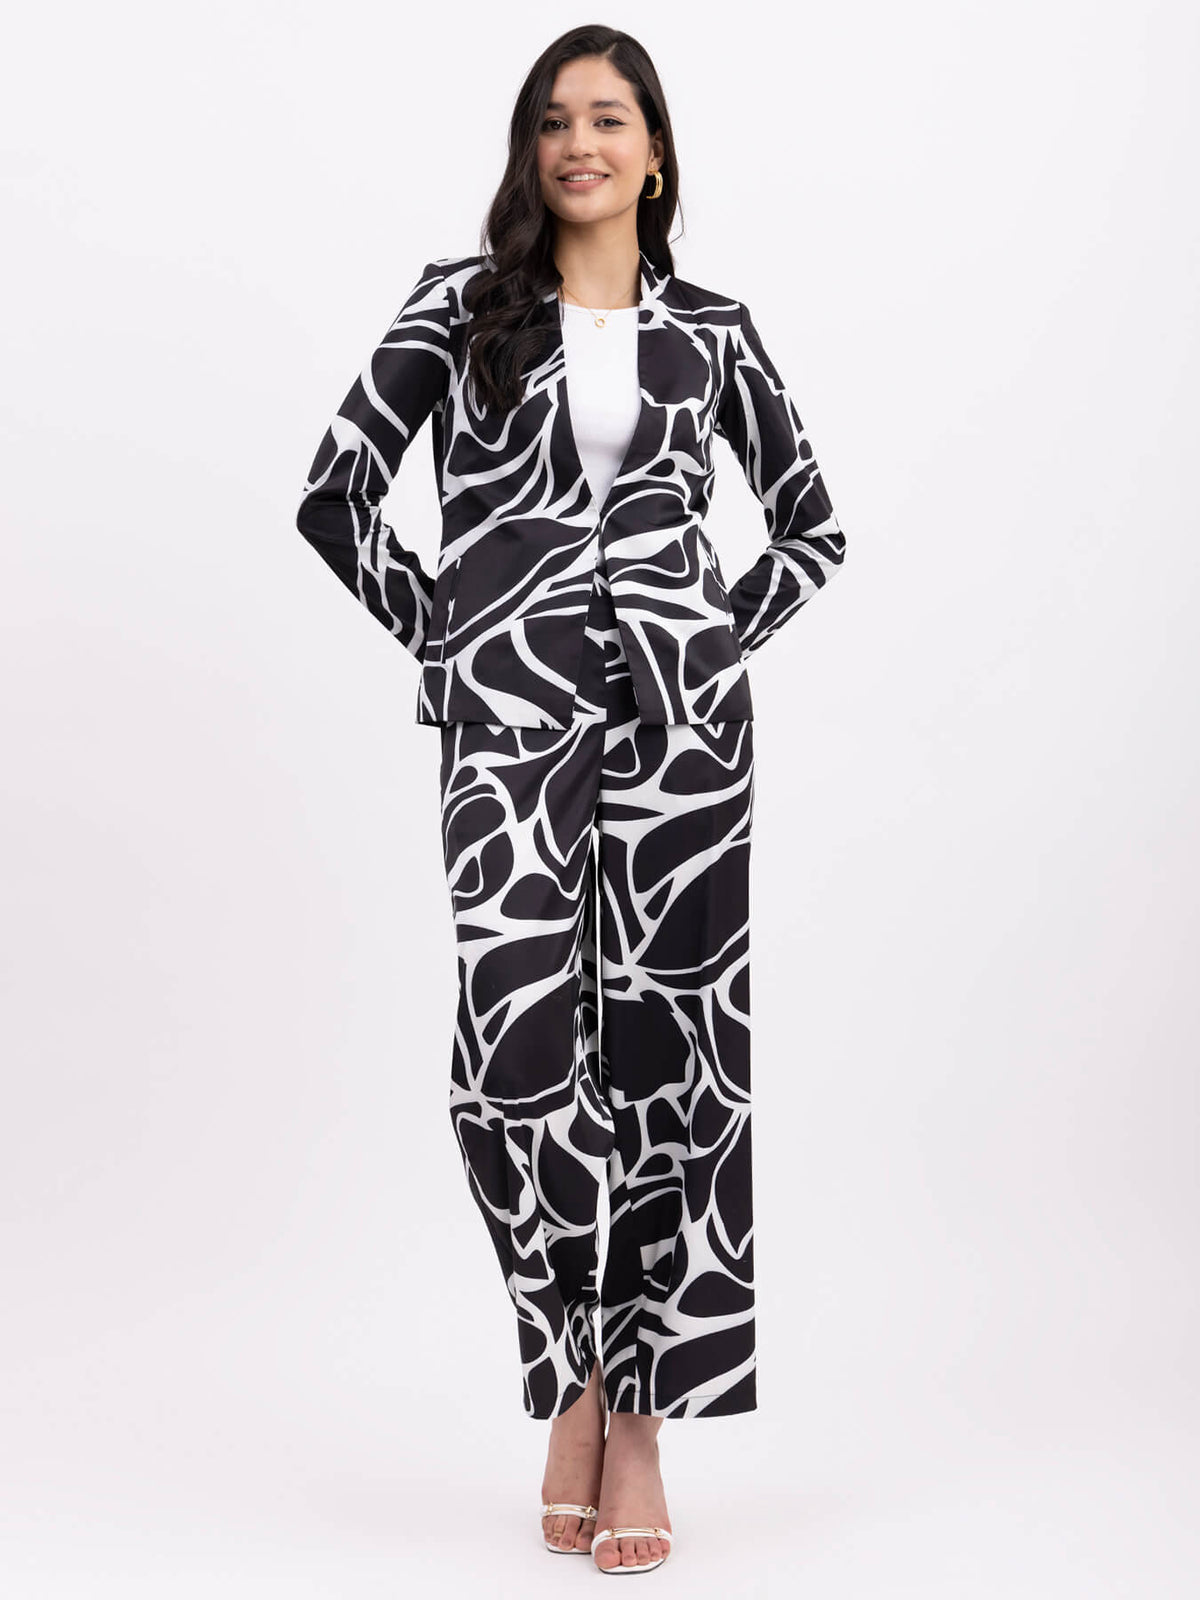 Satin Lined Jacket And Pants Co-ord - Black And White